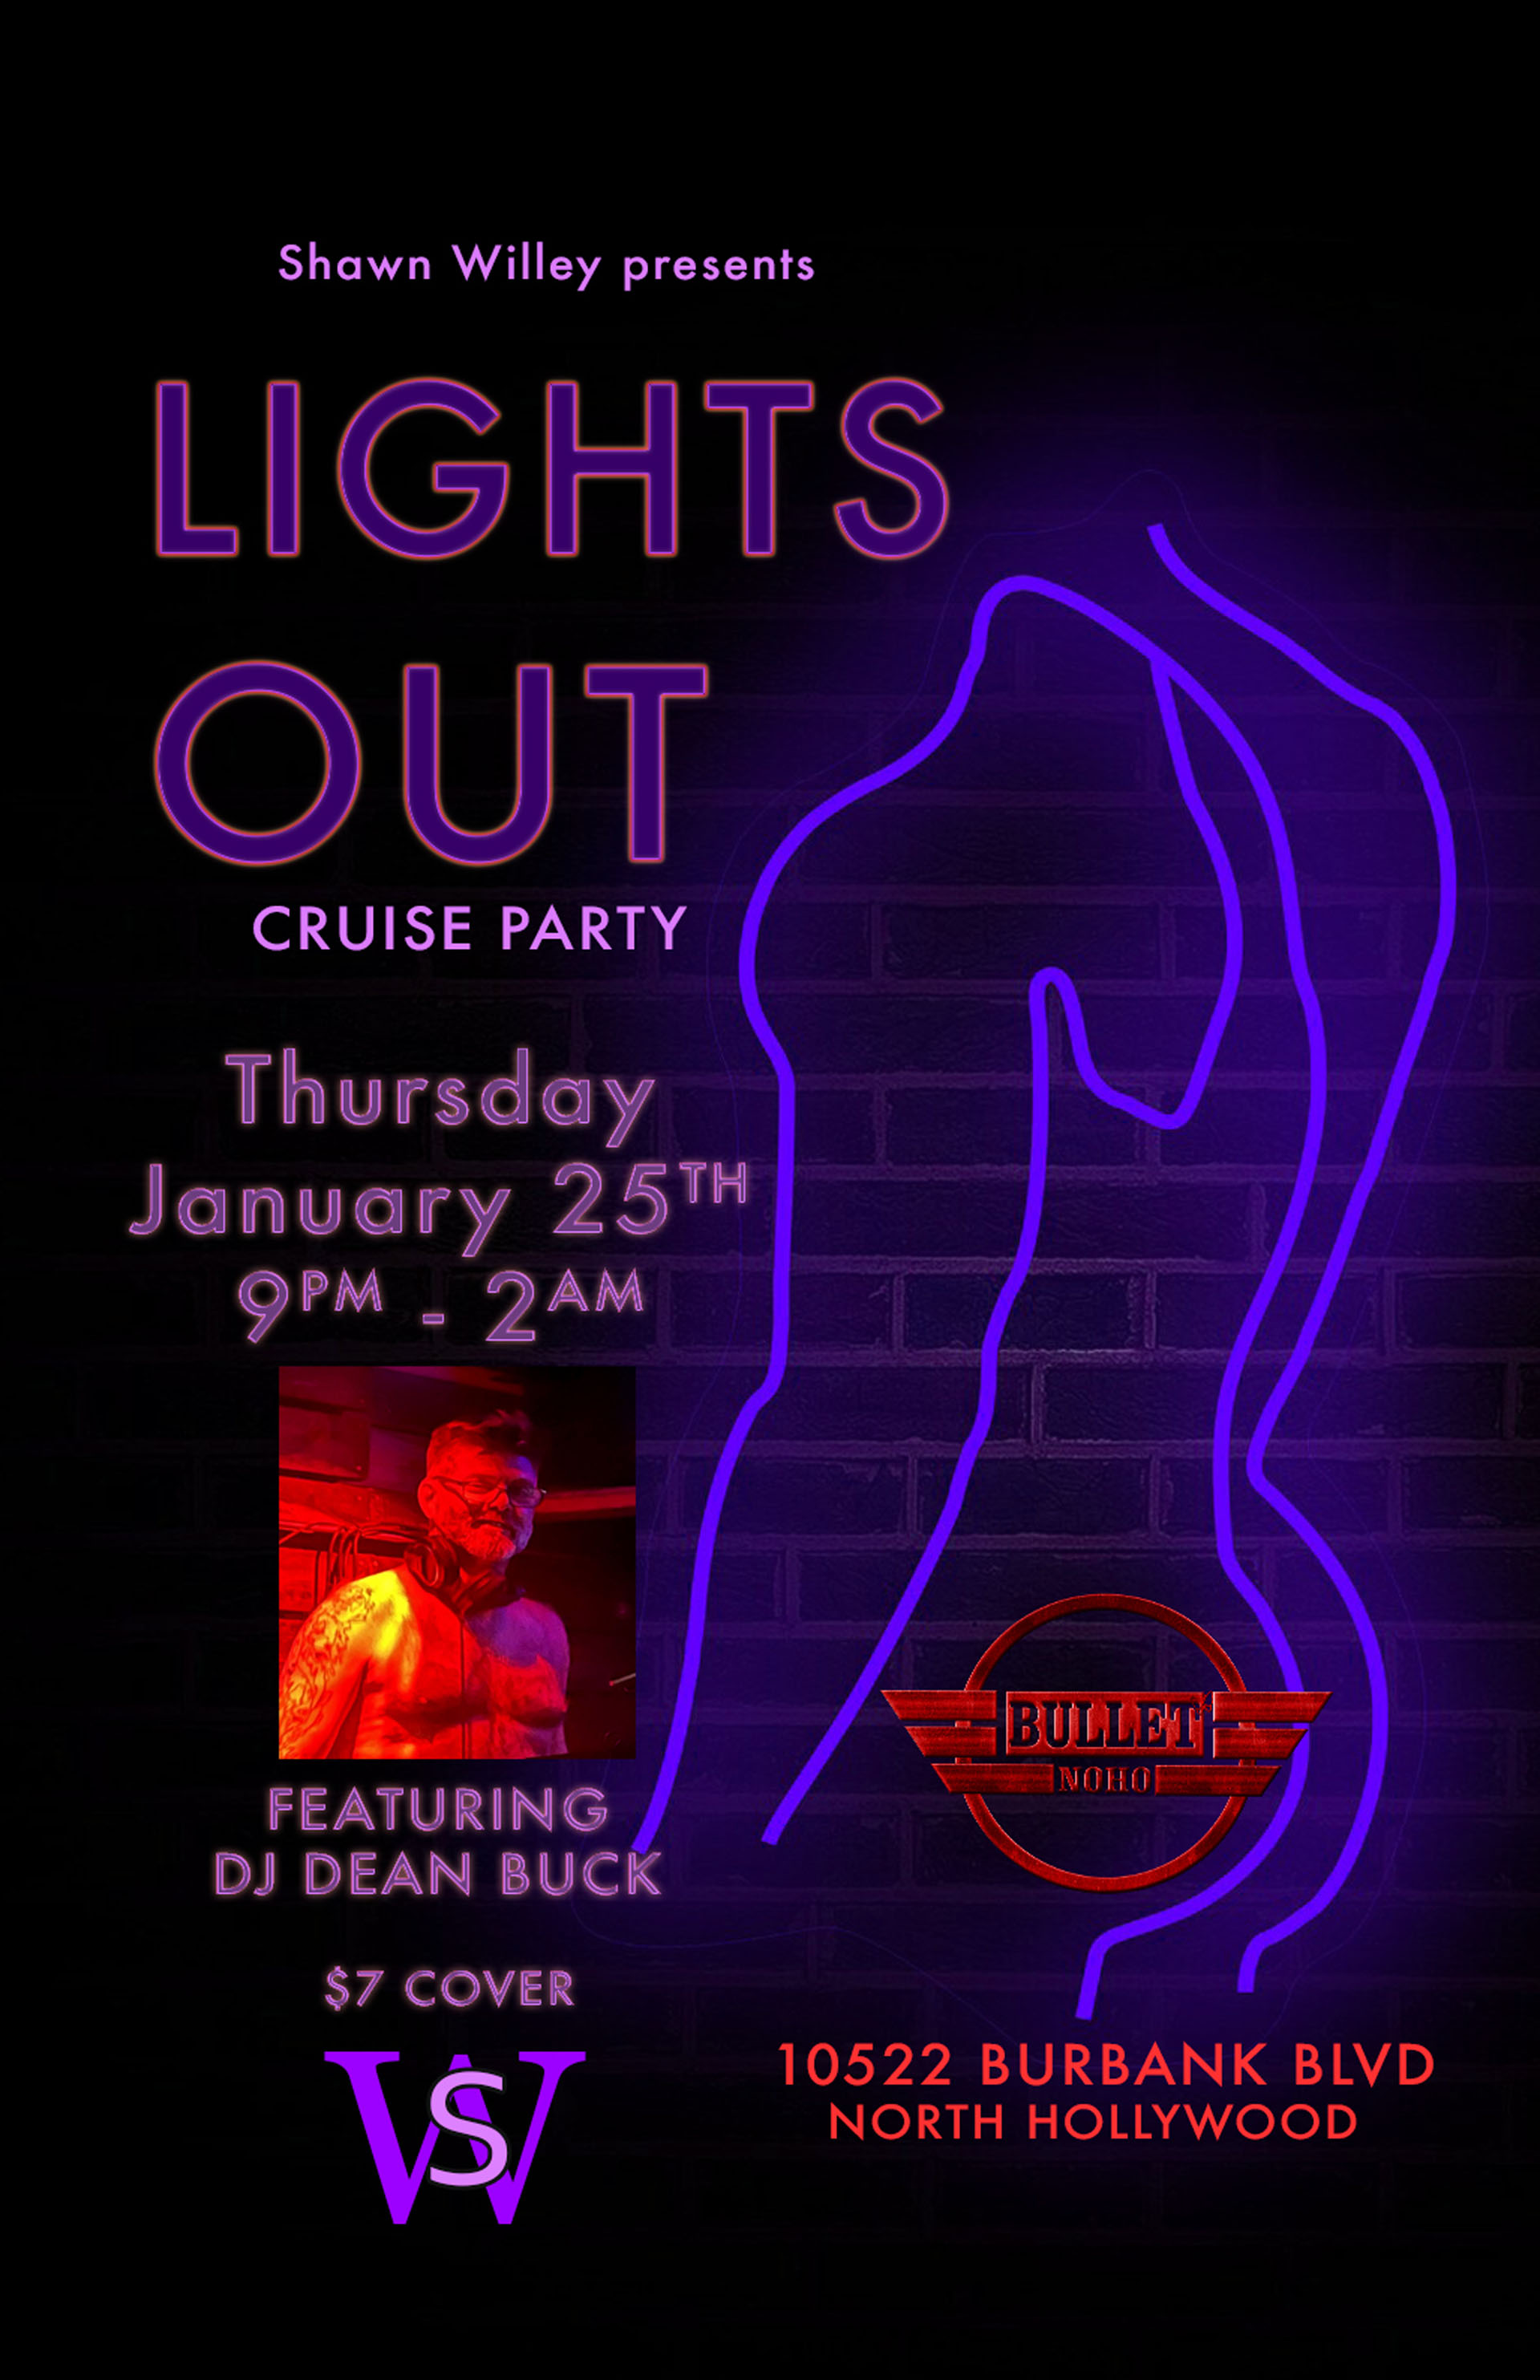 THE BULLET BAR Presents SHAWN WILLEY LIGHTS OUT CRUISE PARTY: Thursday, 01/25/24, 9:00 PM to 2:00 AM. Featuring DJ DEAN BUCK. $7 cover.